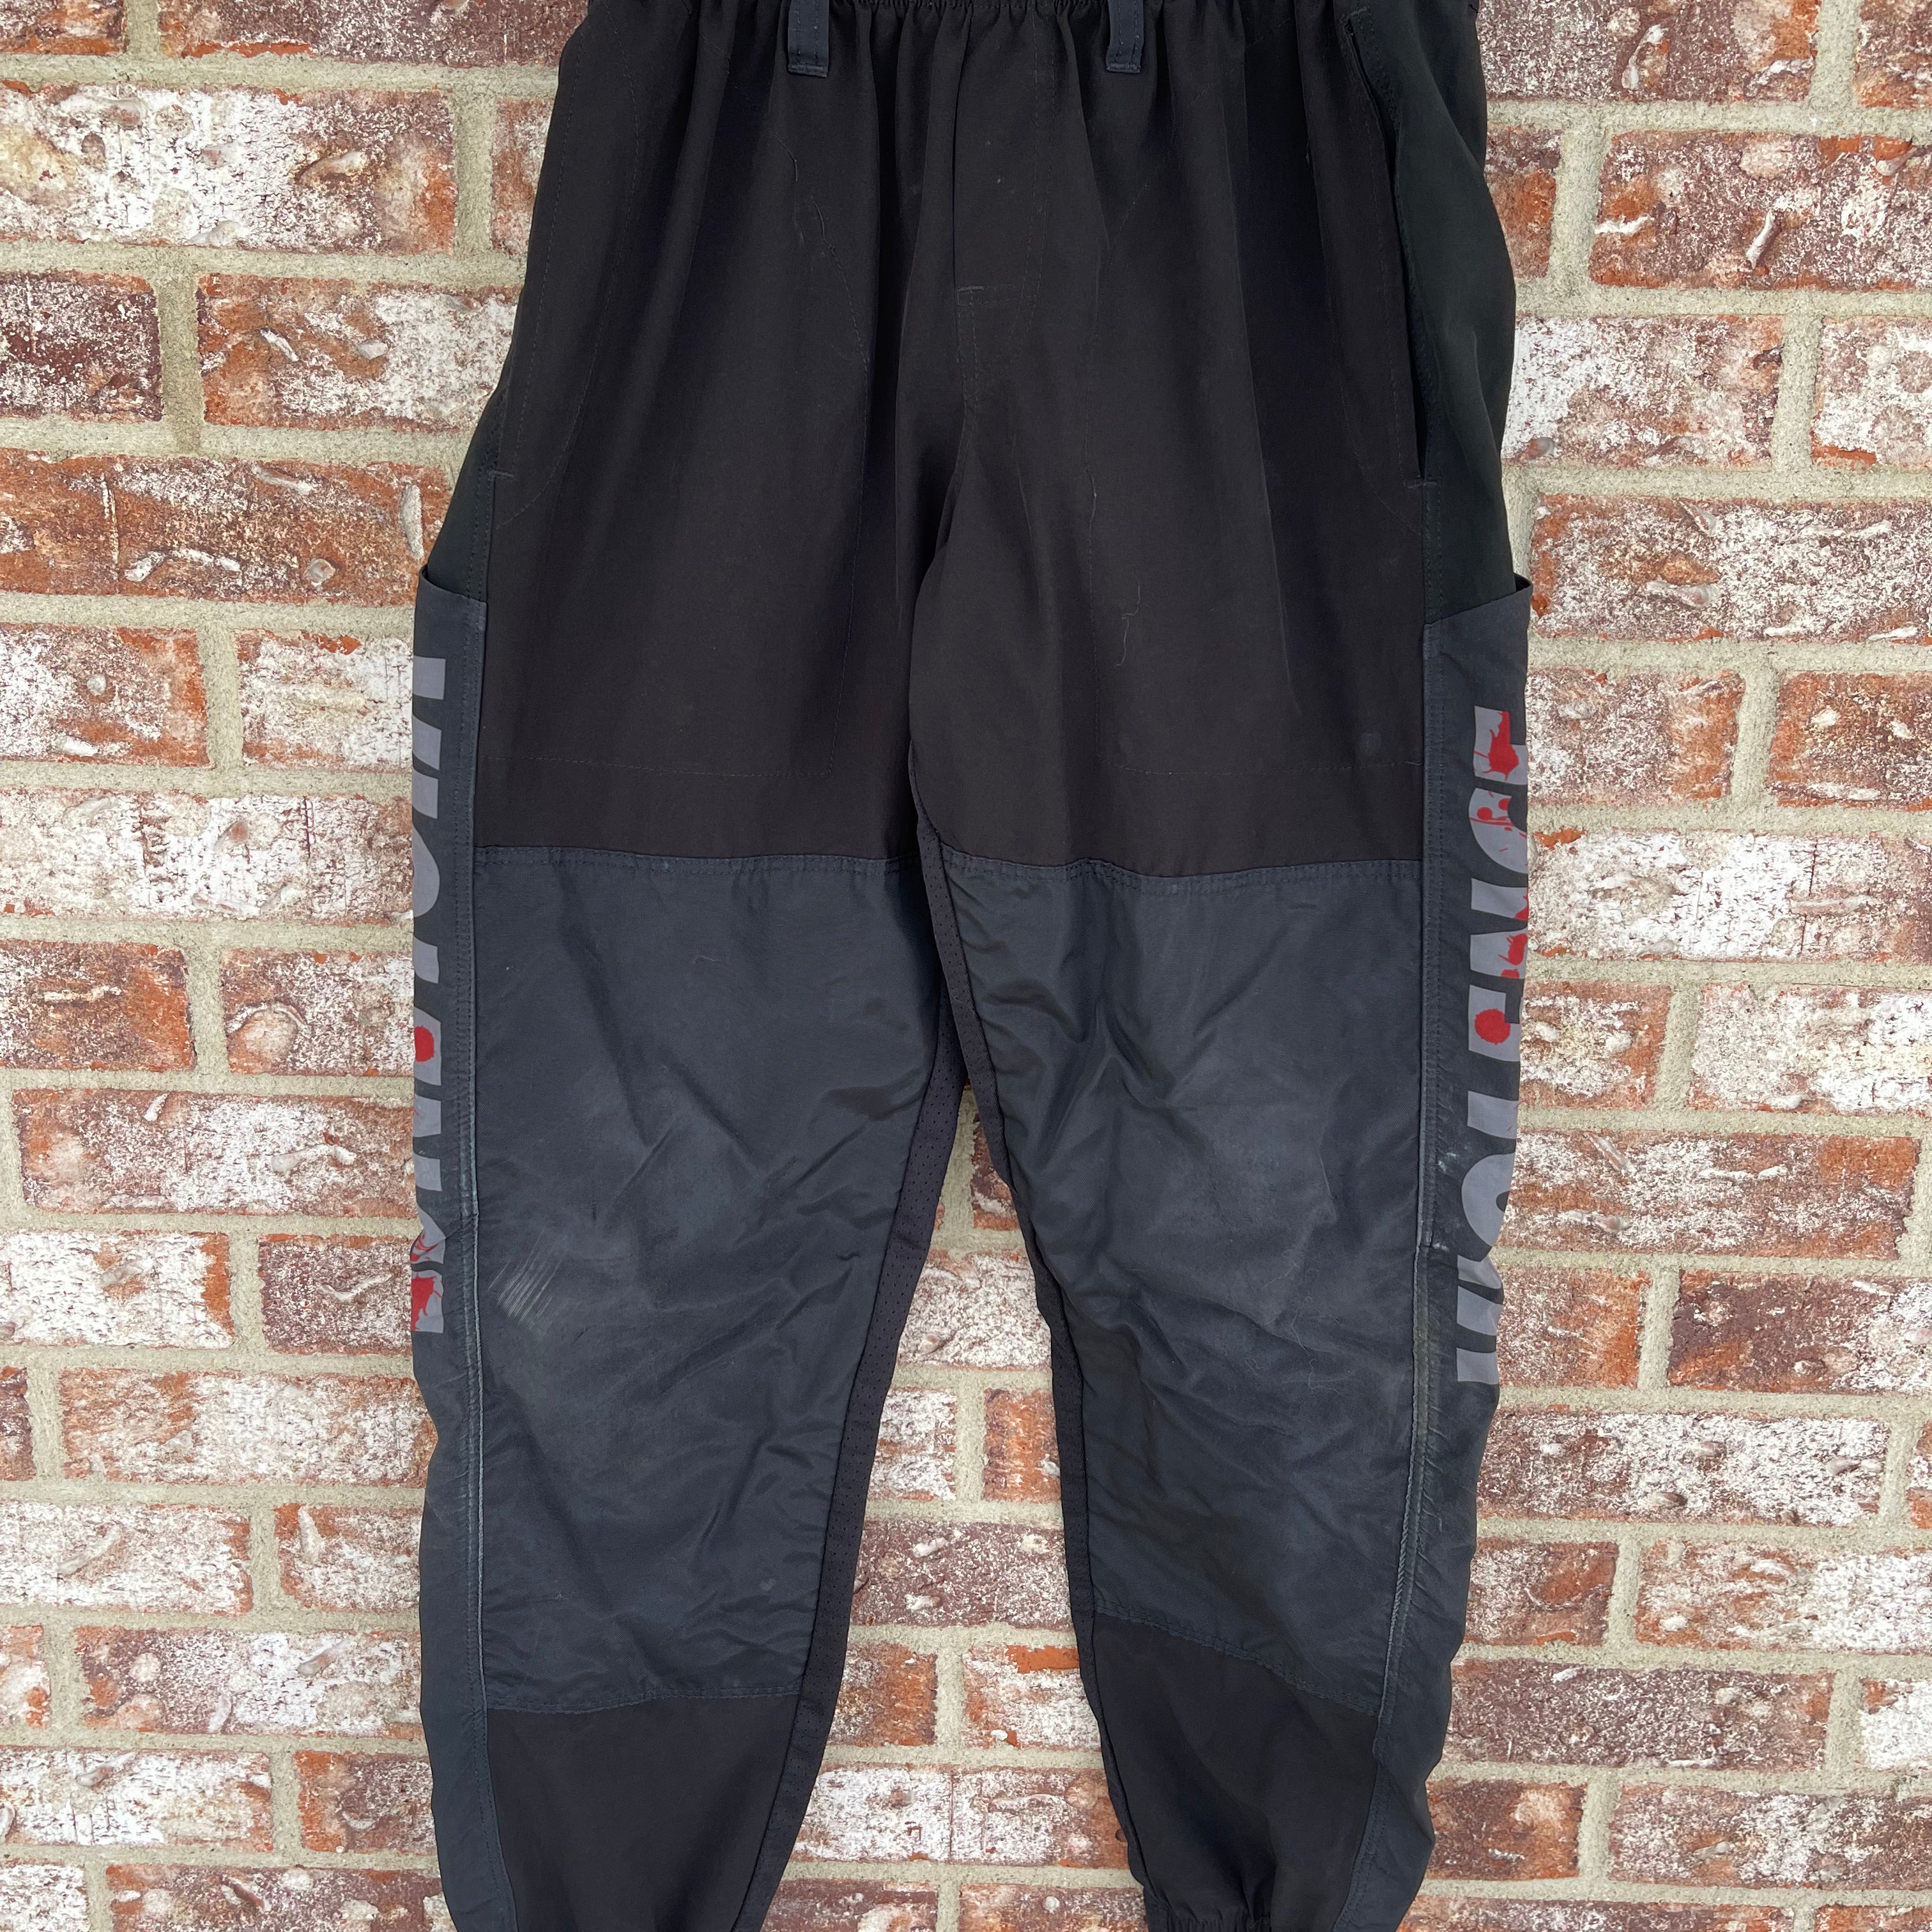 Used Paintball Joggers - "Violence" - Small (Black)